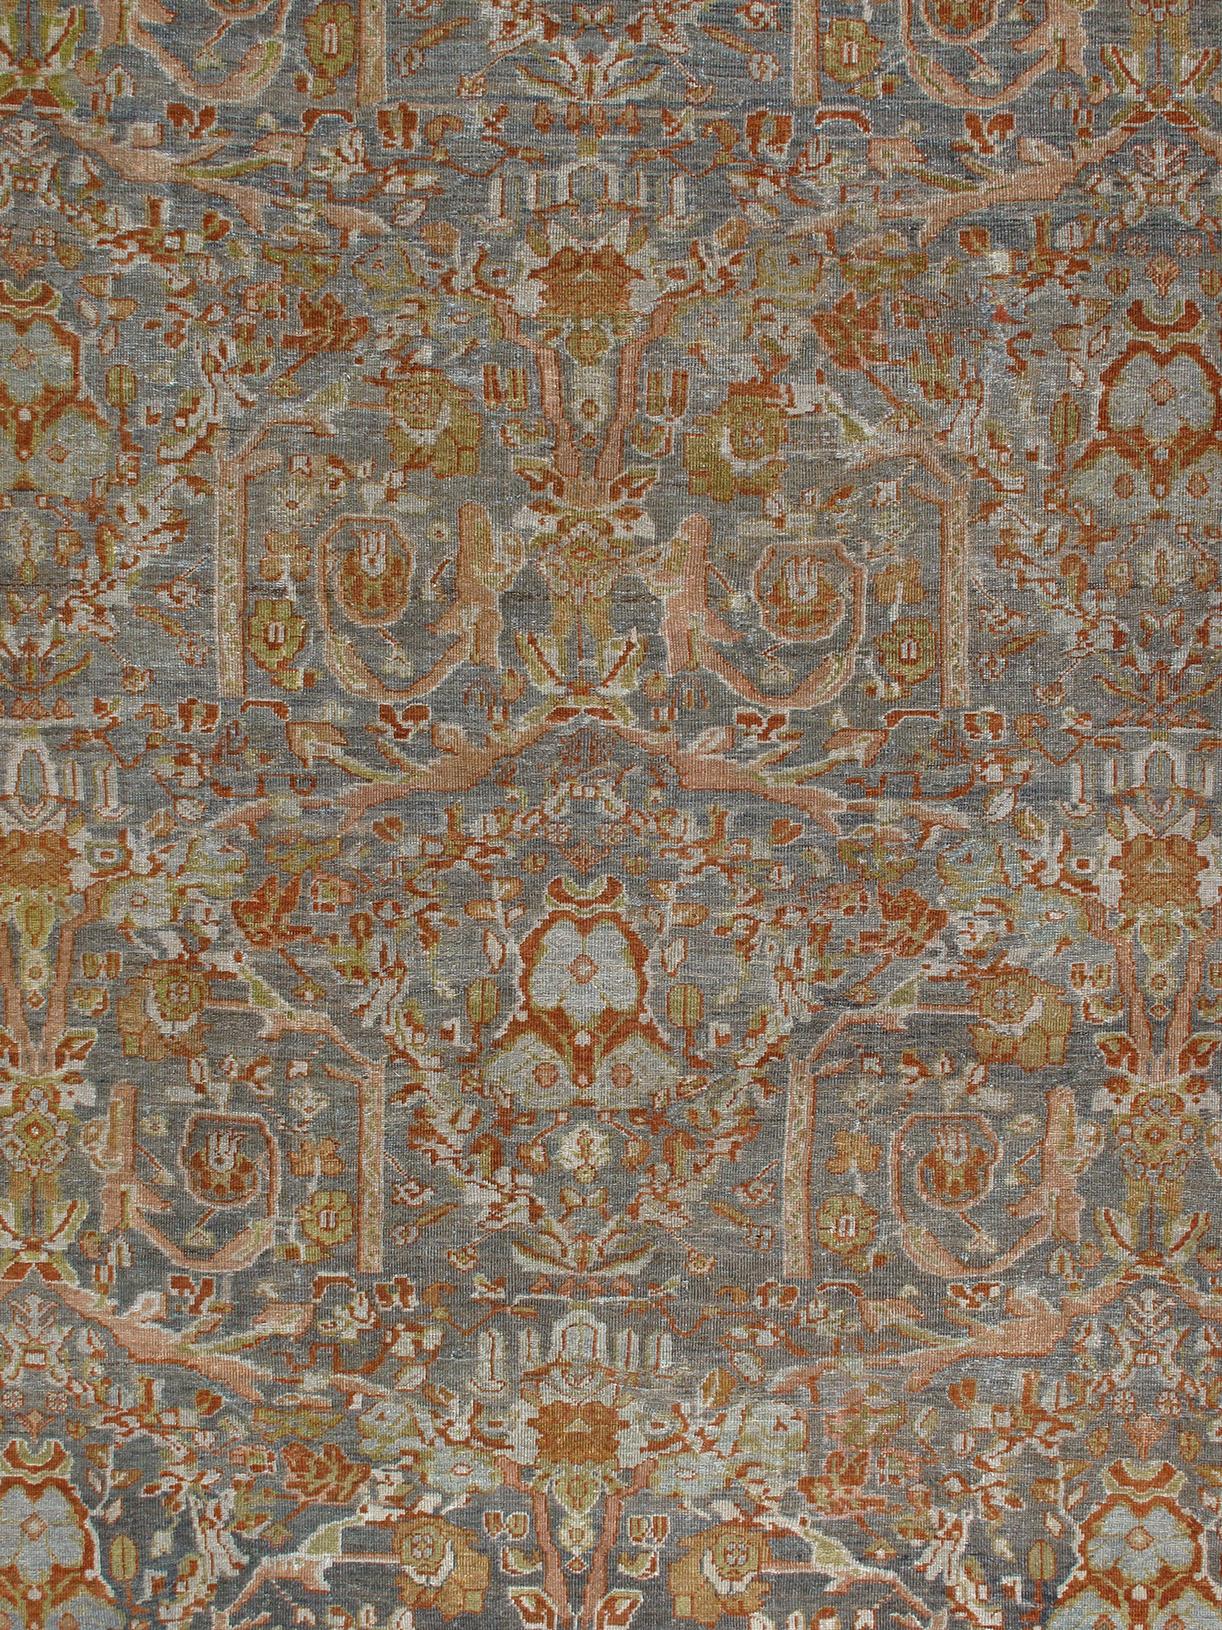 Absolutely breathtaking Antique Ziegler Sultanabad rug from the early 20th century in impeccable condition. This is a true statement piece that will transform any space. Beautiful blue background color with rust accents, made from 100% handspun and